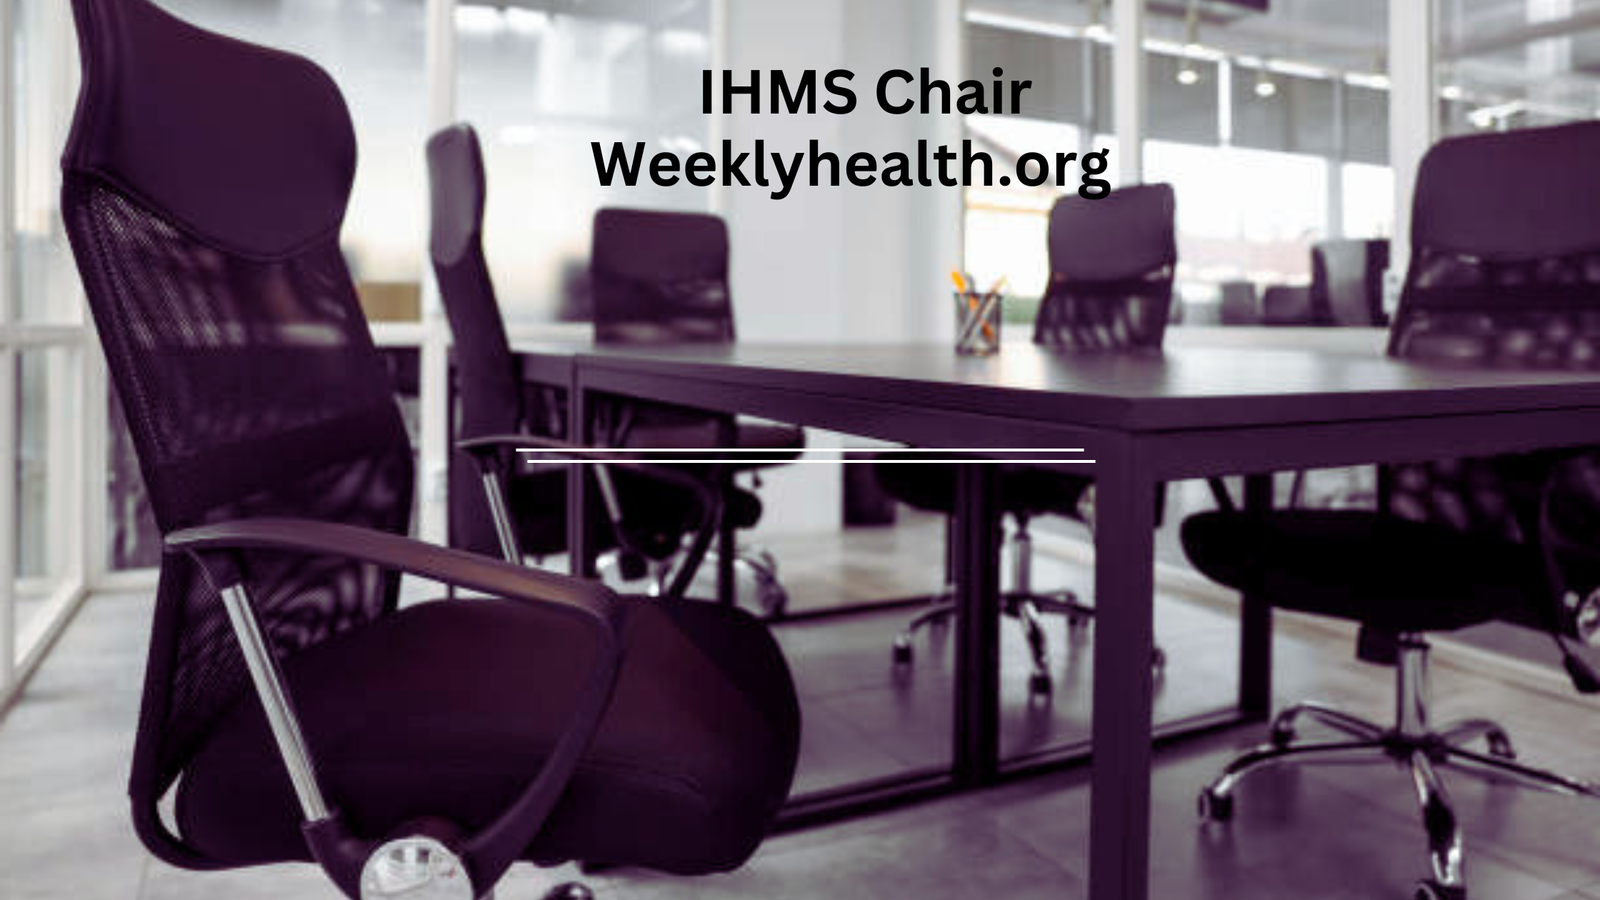 IHMS Chair: Revolutionizing Healthcare with Comfort and Innovation